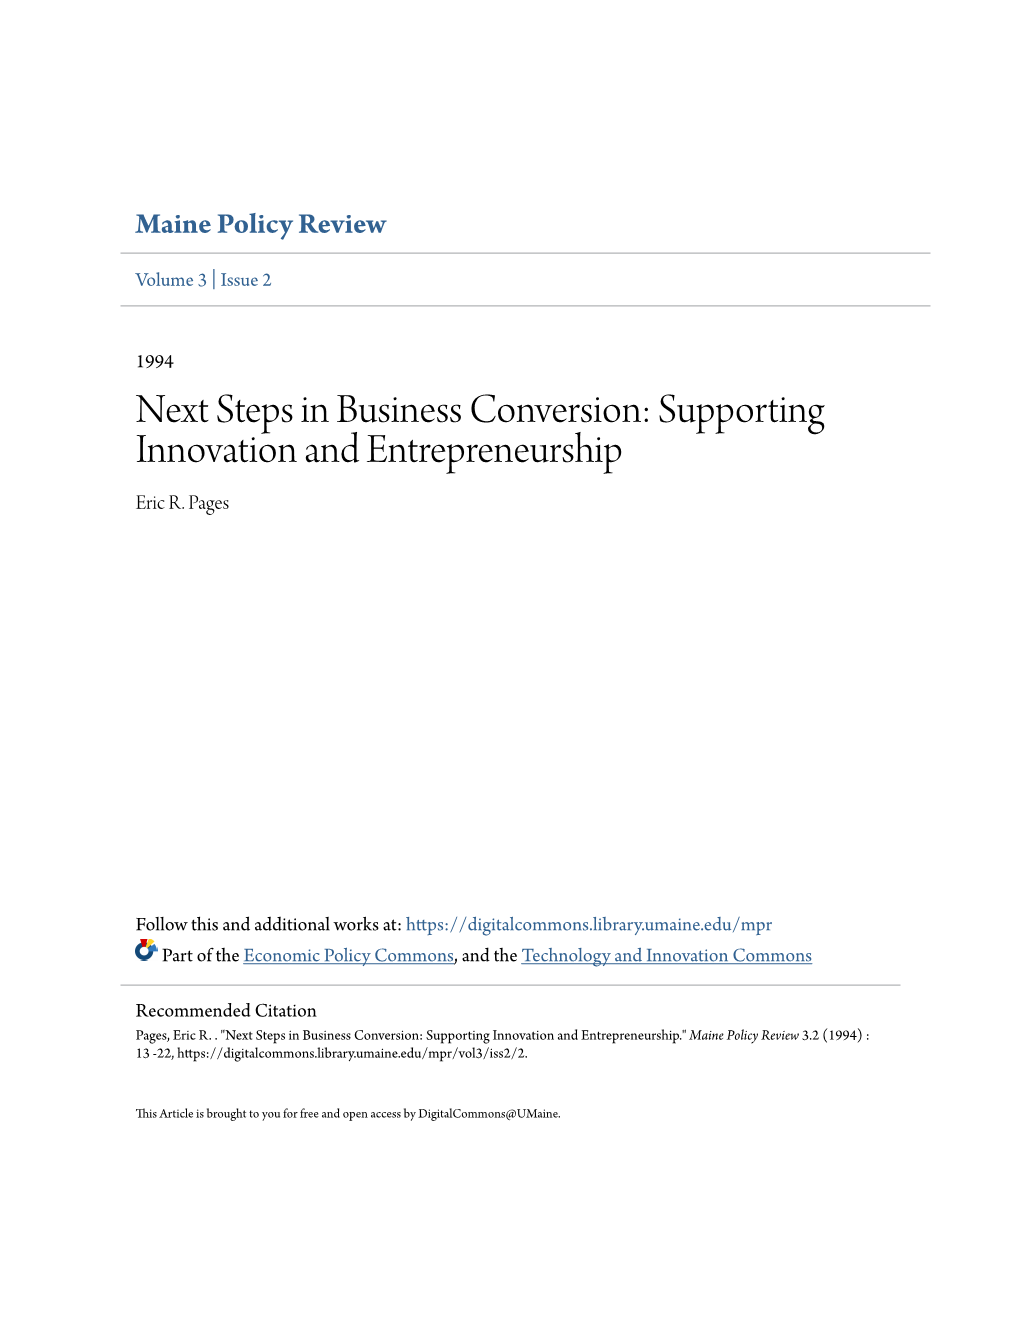 Next Steps in Business Conversion: Supporting Innovation and Entrepreneurship Eric R